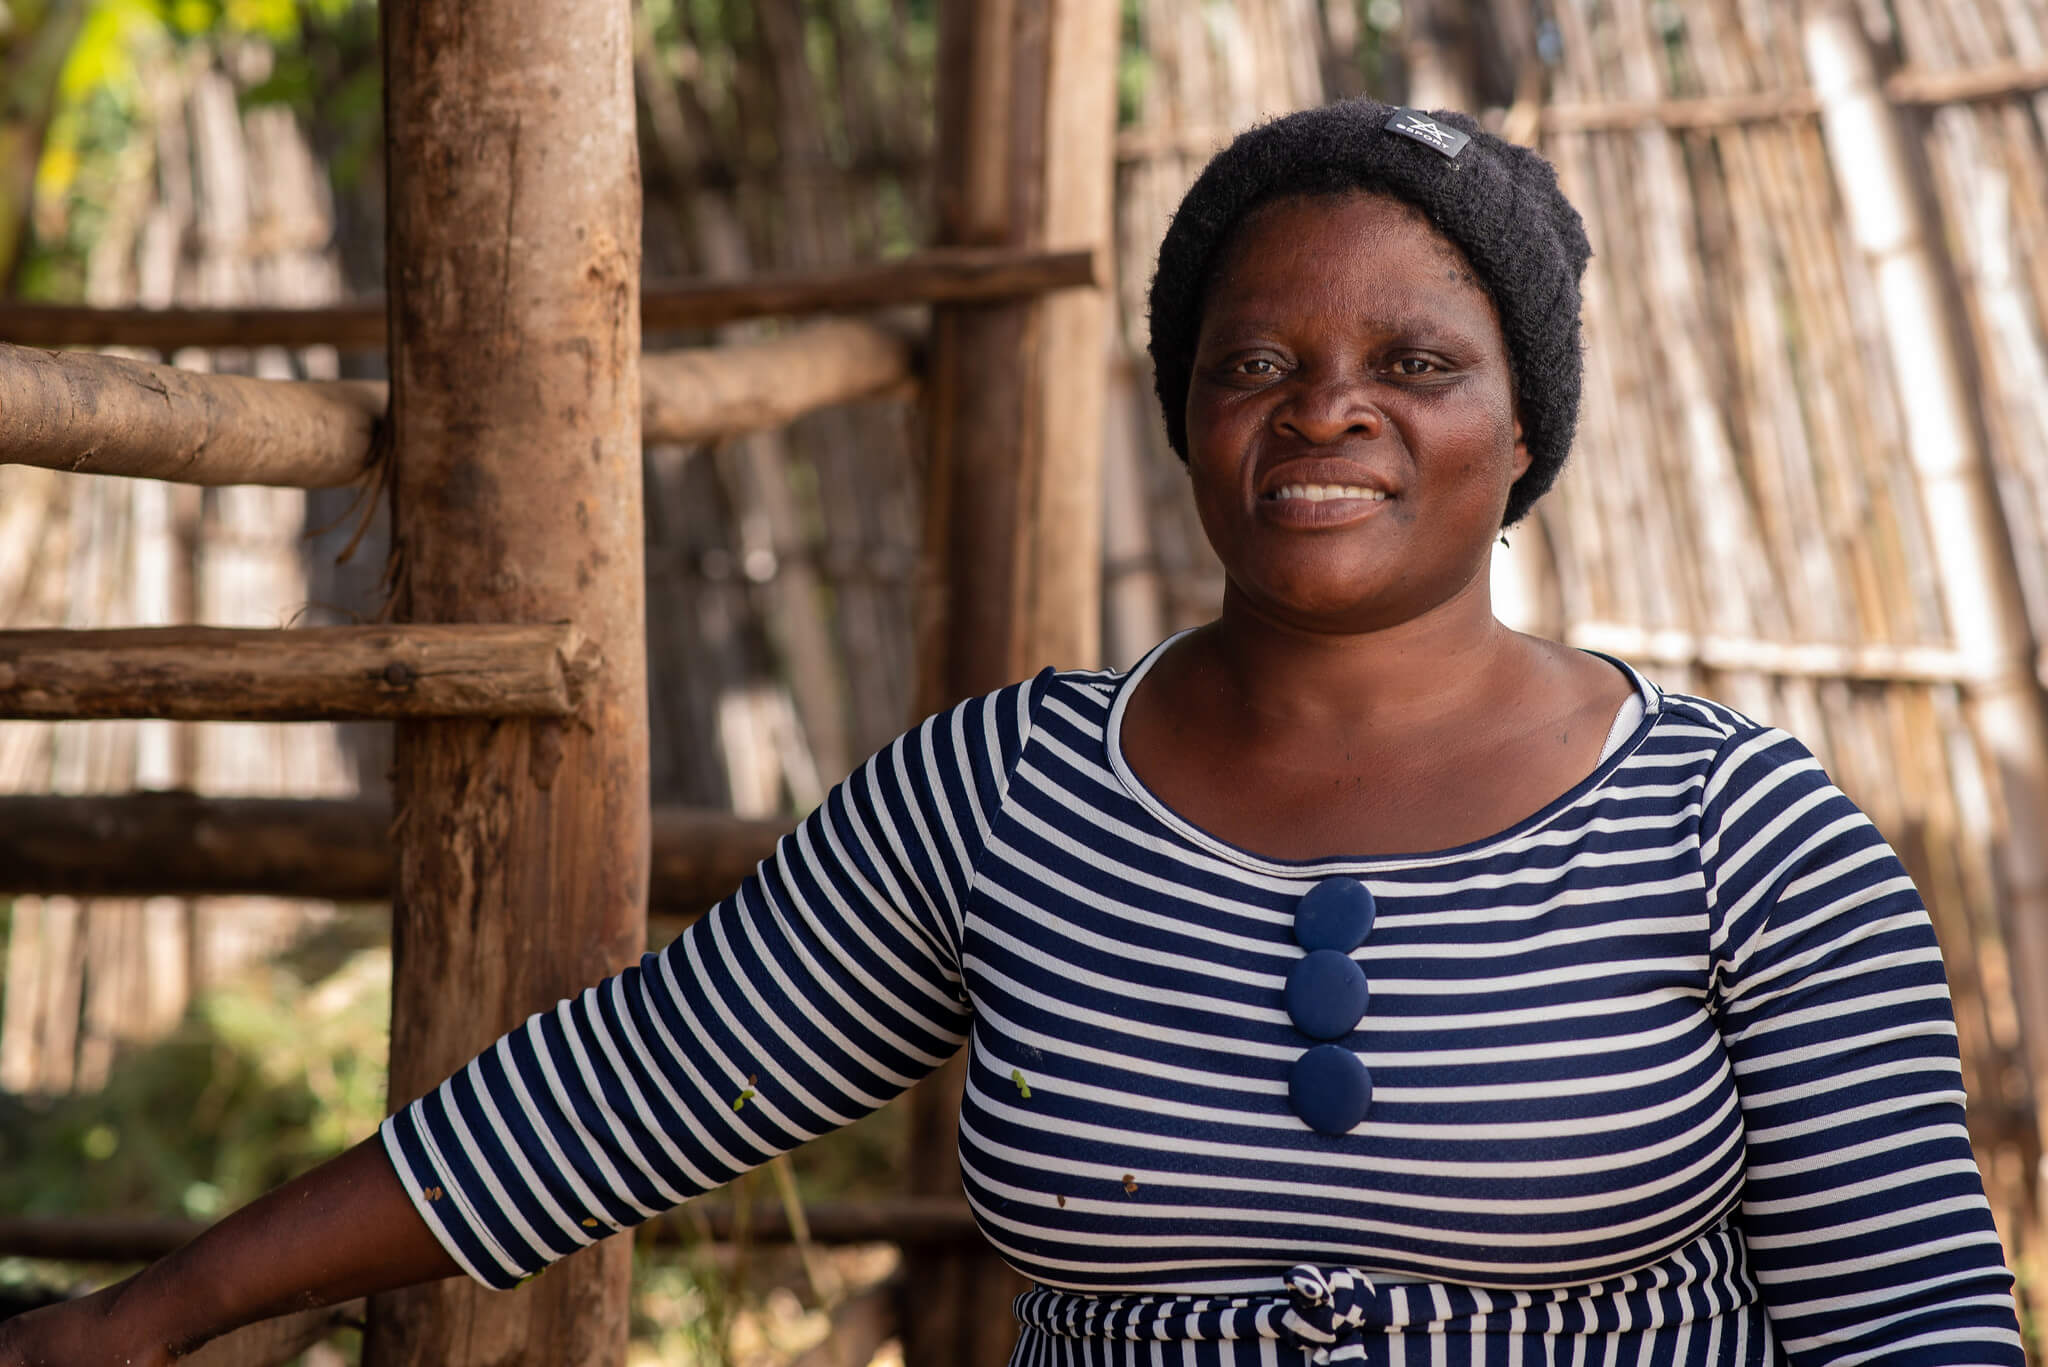 Agness is a participant of the Strategic Alliance programme by ETP and GIZ. The programme provided her with training in business idea creation, management, and savings advice. This allowed her to save money with a VSLA called Timverane, and raise capital to start her own business in agro dealership. Chitengu Village, Thyolo District, Malawi. Image: ETP/Homeline Media